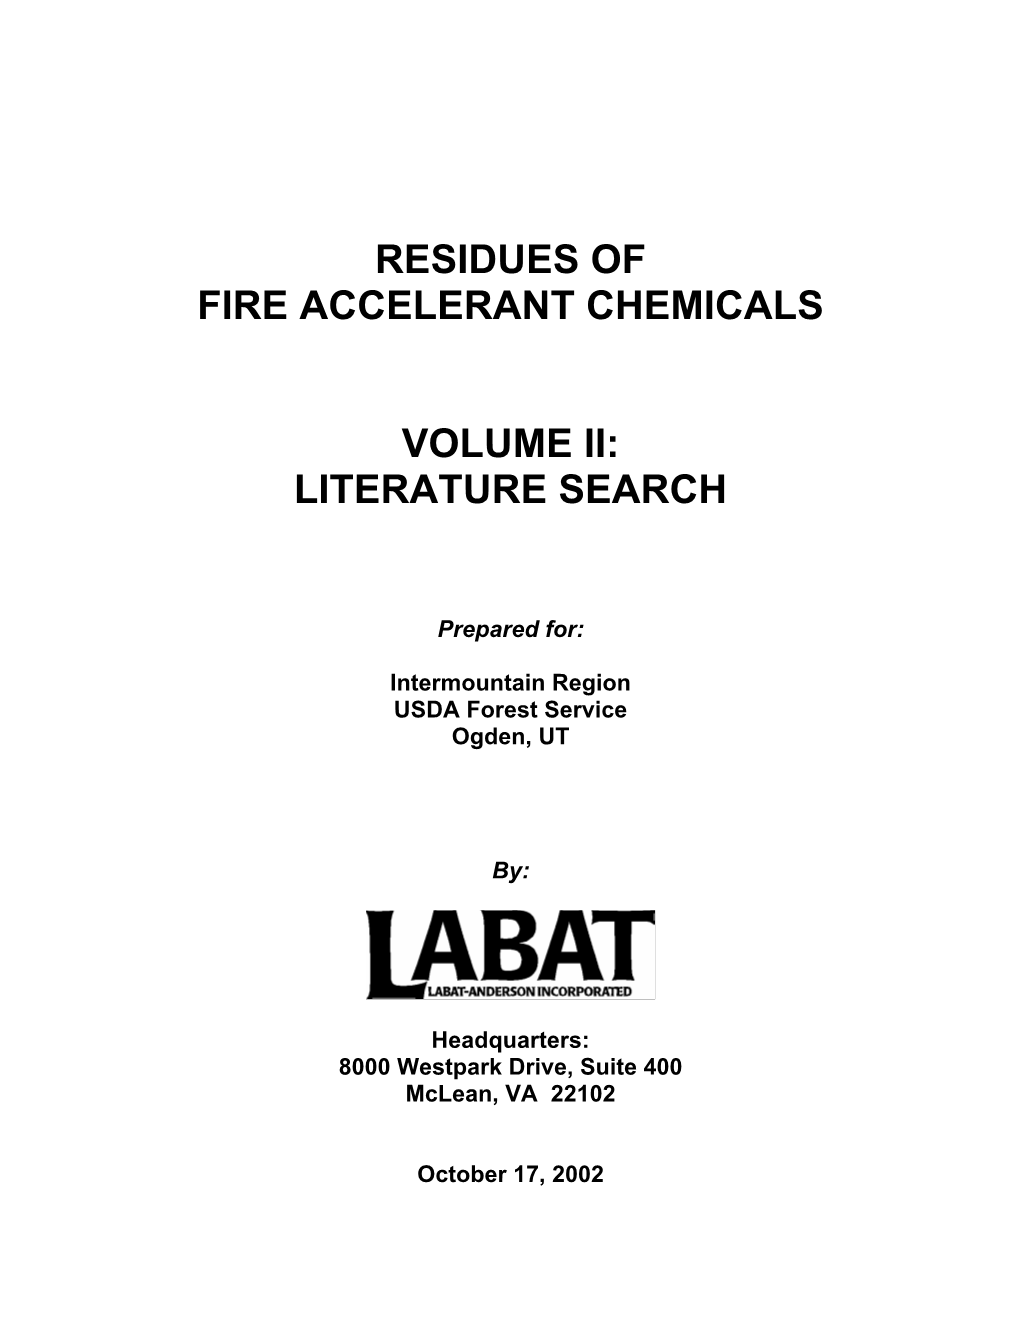 Chemicals List, Presents the Fire Accelerants, Their Chemical Components, and the Residues Expected to Remain Following Combustion